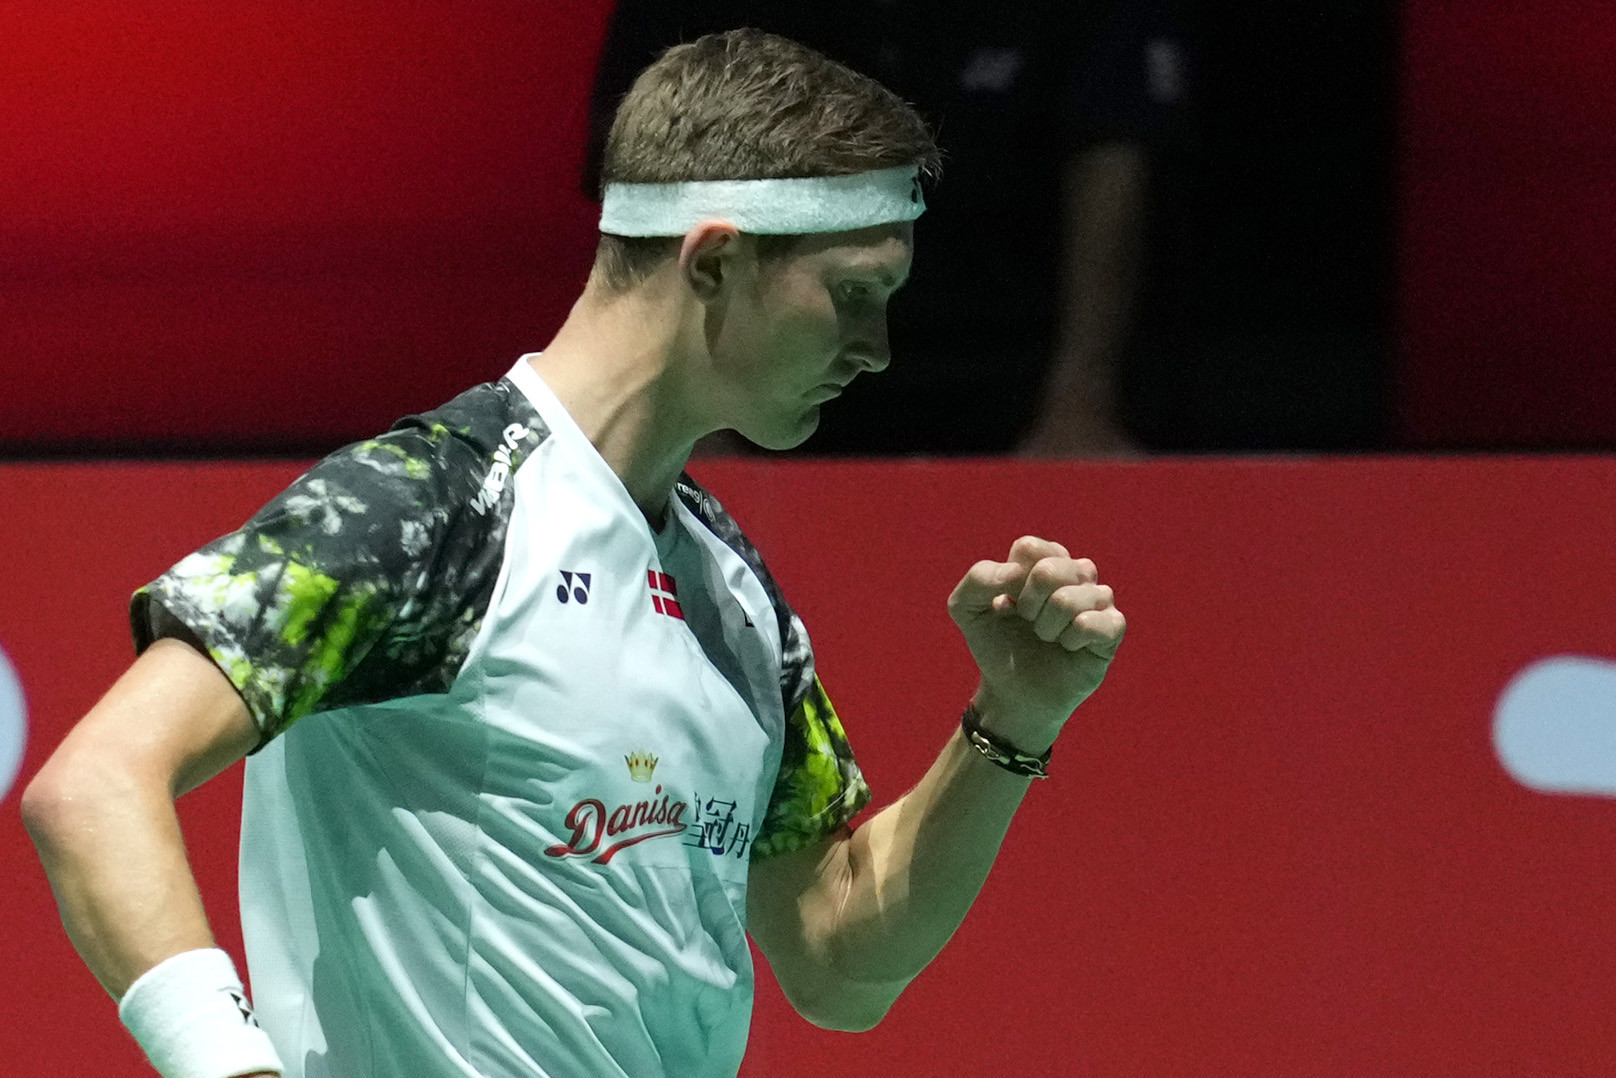 Viktor Axelsen of Denmark cruised to an easy 21-13, 21-11 win over Lu Guangzu of China ©Getty Images